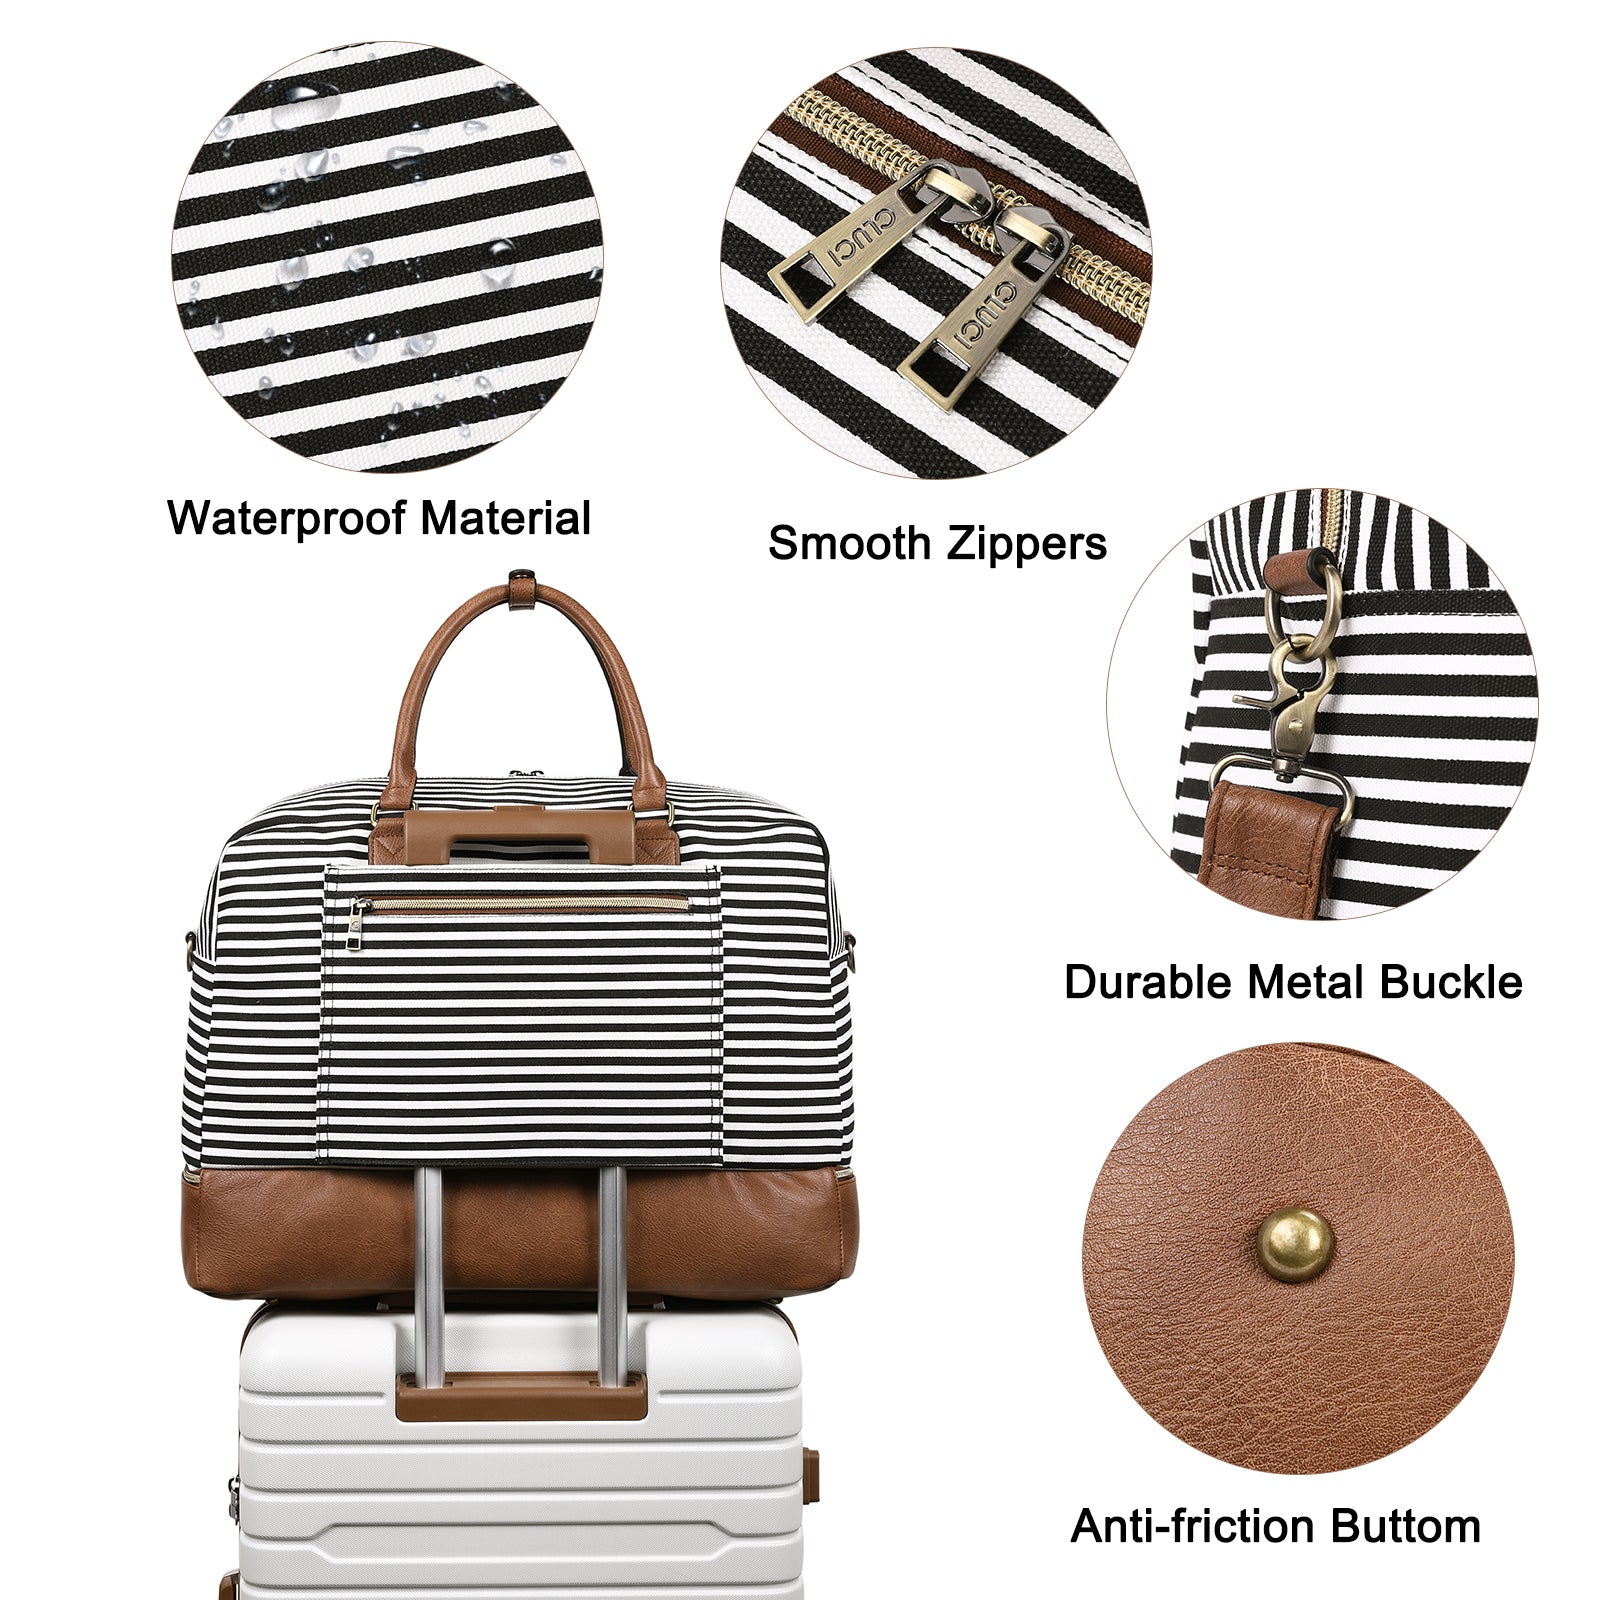 Leather Oversized Weekender Bags